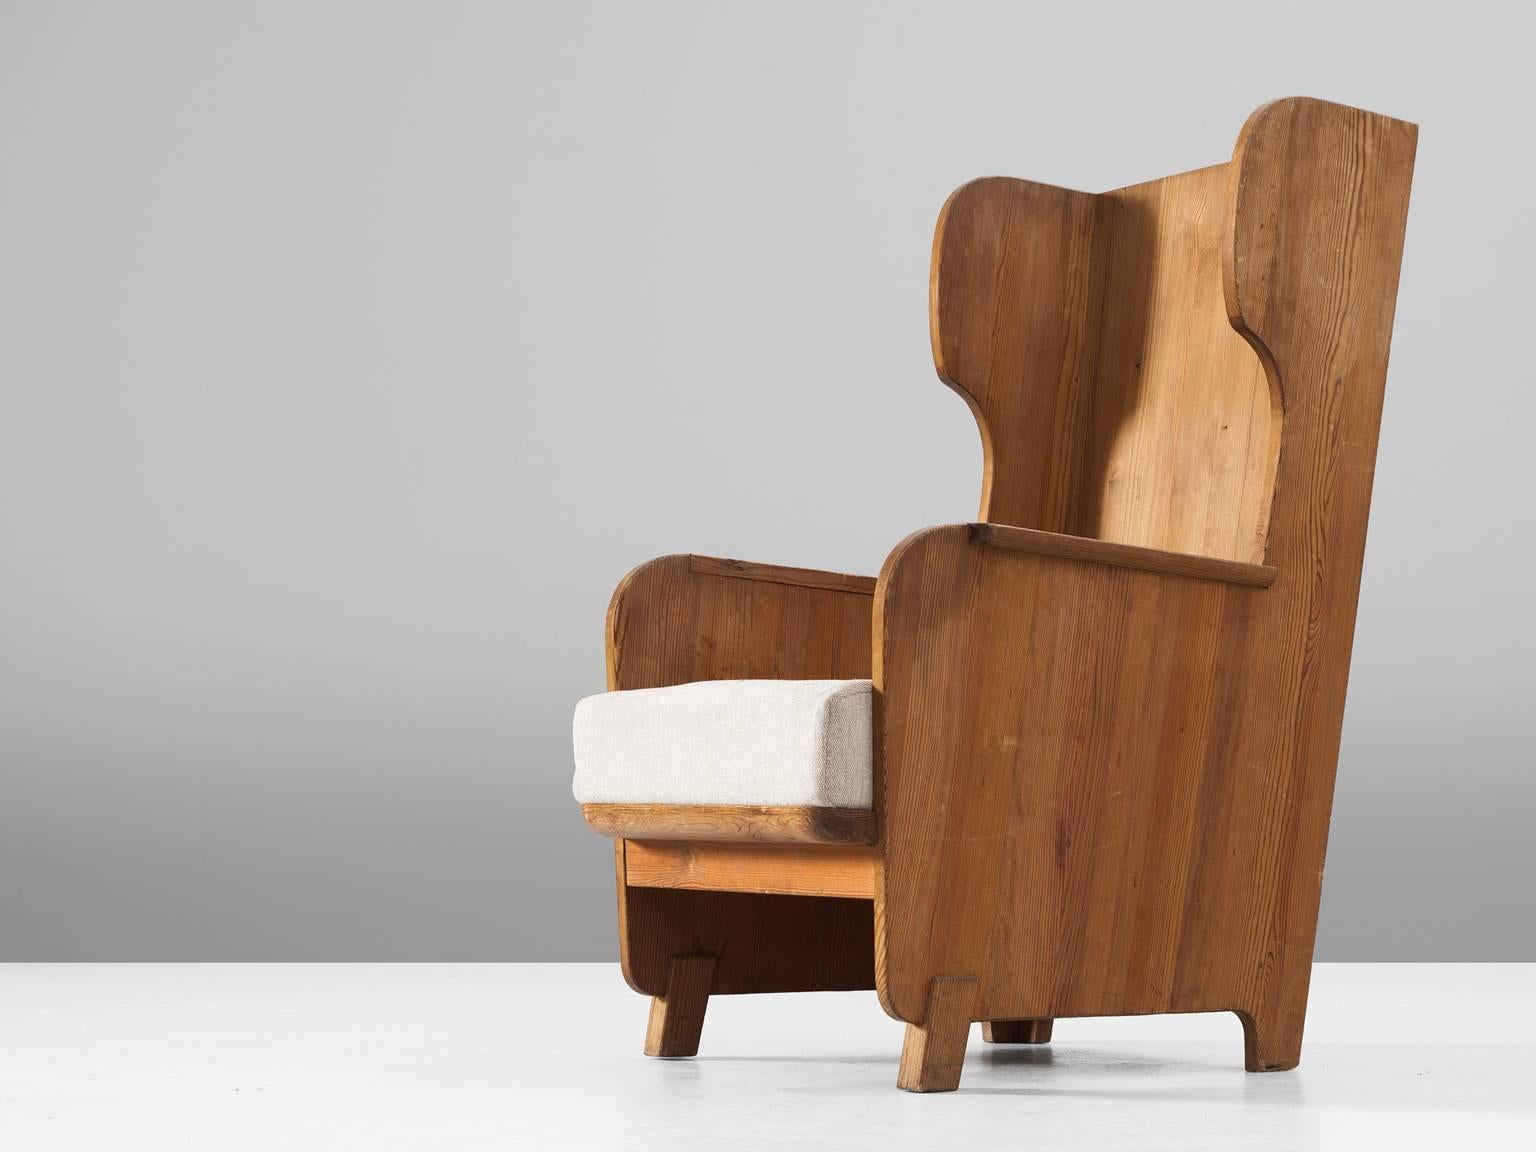 Axel Einar Hjorth for Nordiska Kompaniet, wingback chair 'Lovo', in pine and fabric, by Sweden, 1932. 

Sturdy high back chair in solid pine by Axel Einar Hjorth. This chair has all classical elements of a wingback chair, yet due the execution in